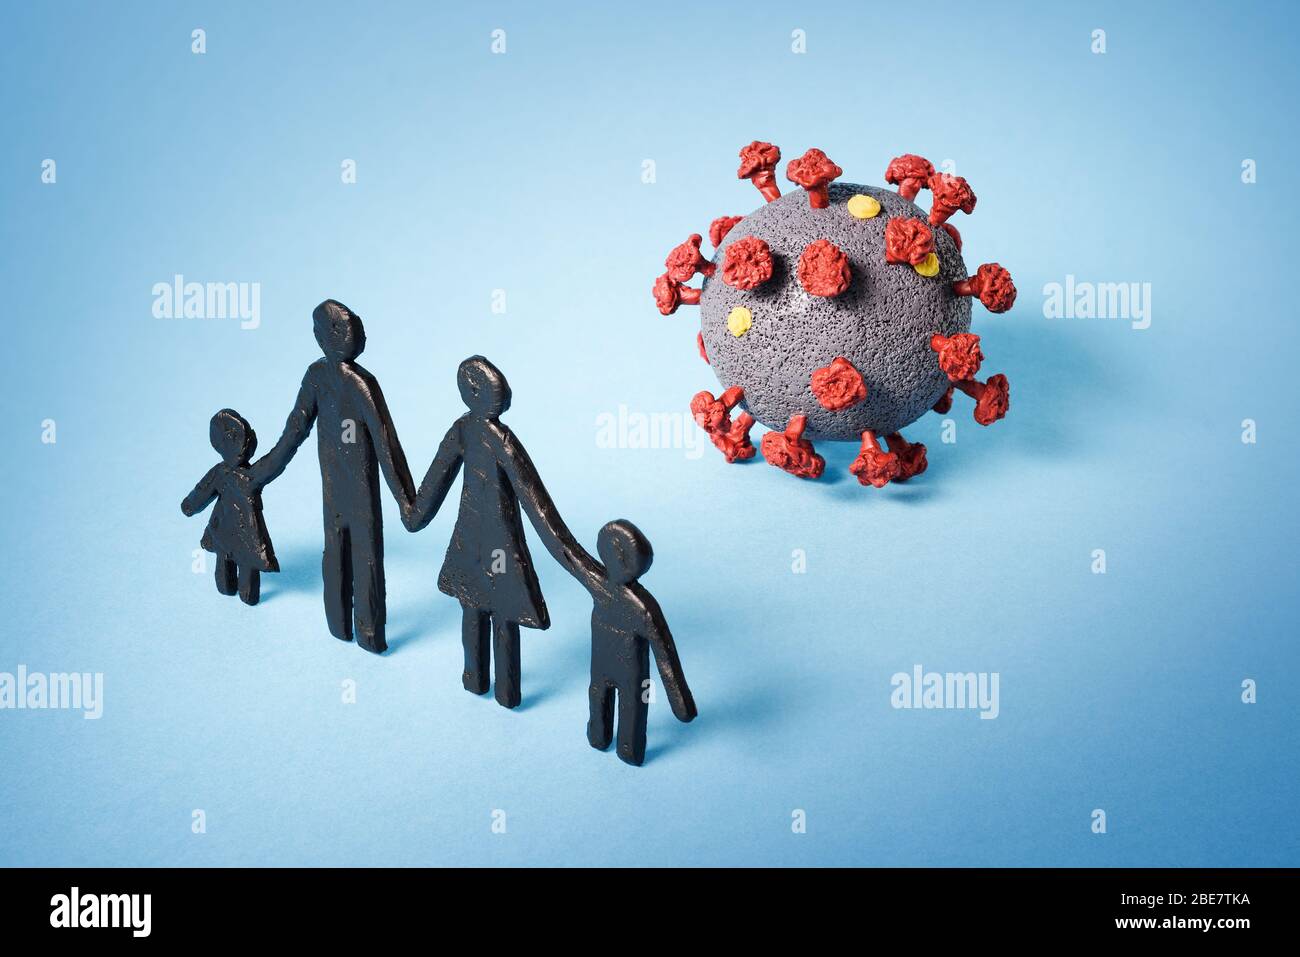 Family facing the threat of coronavirus infection. COVID-19 pandemic. Social distancing concept Stock Photo